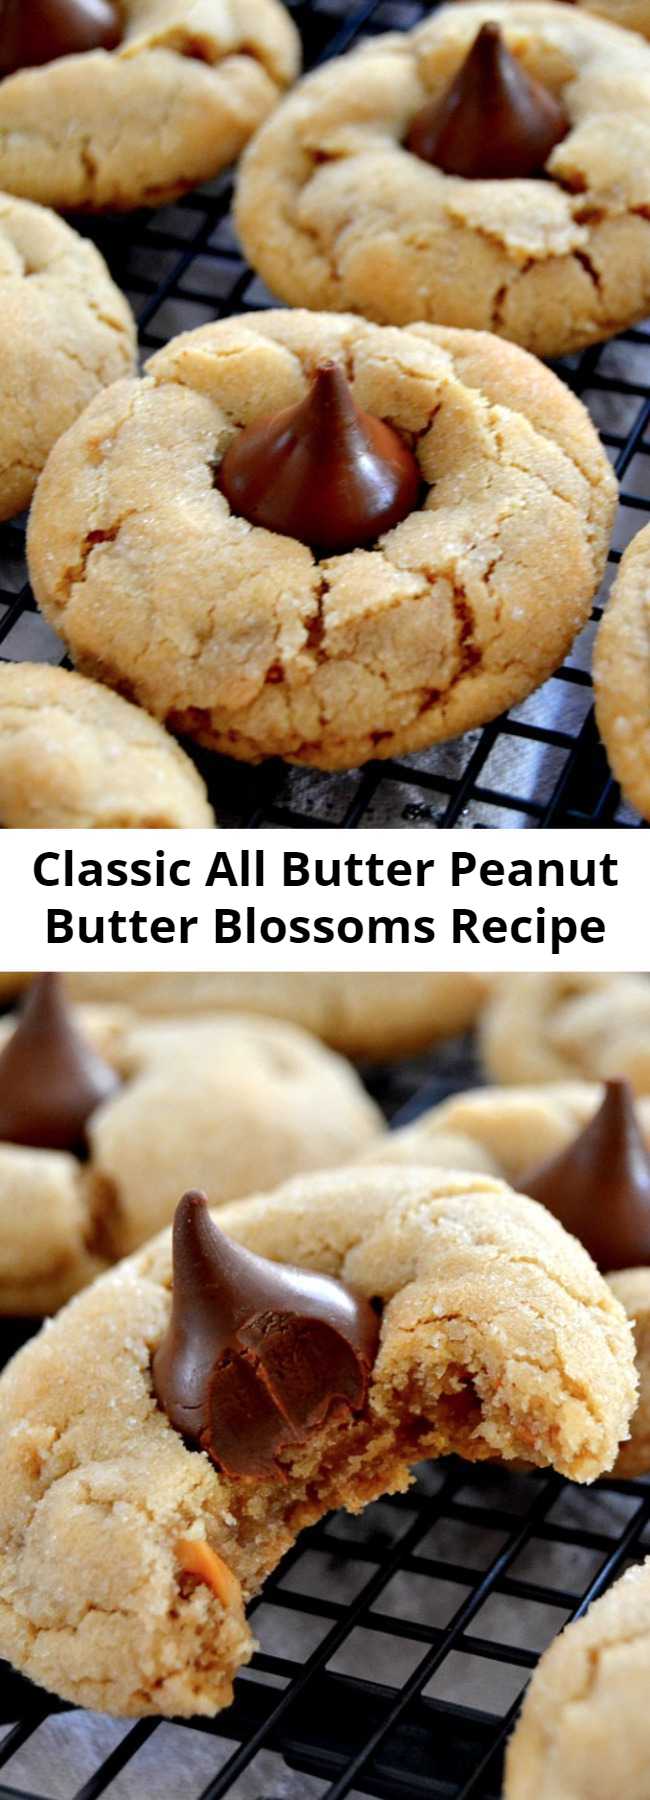 Classic All Butter Peanut Butter Blossoms Recipe - These Classic All-Butter Peanut Butter Blossoms are perfection! Soft, chewy and studded with a solid milk chocolate candy for that classic cookie everyone loves. This dough is so foolproof and doesn't require chilling!